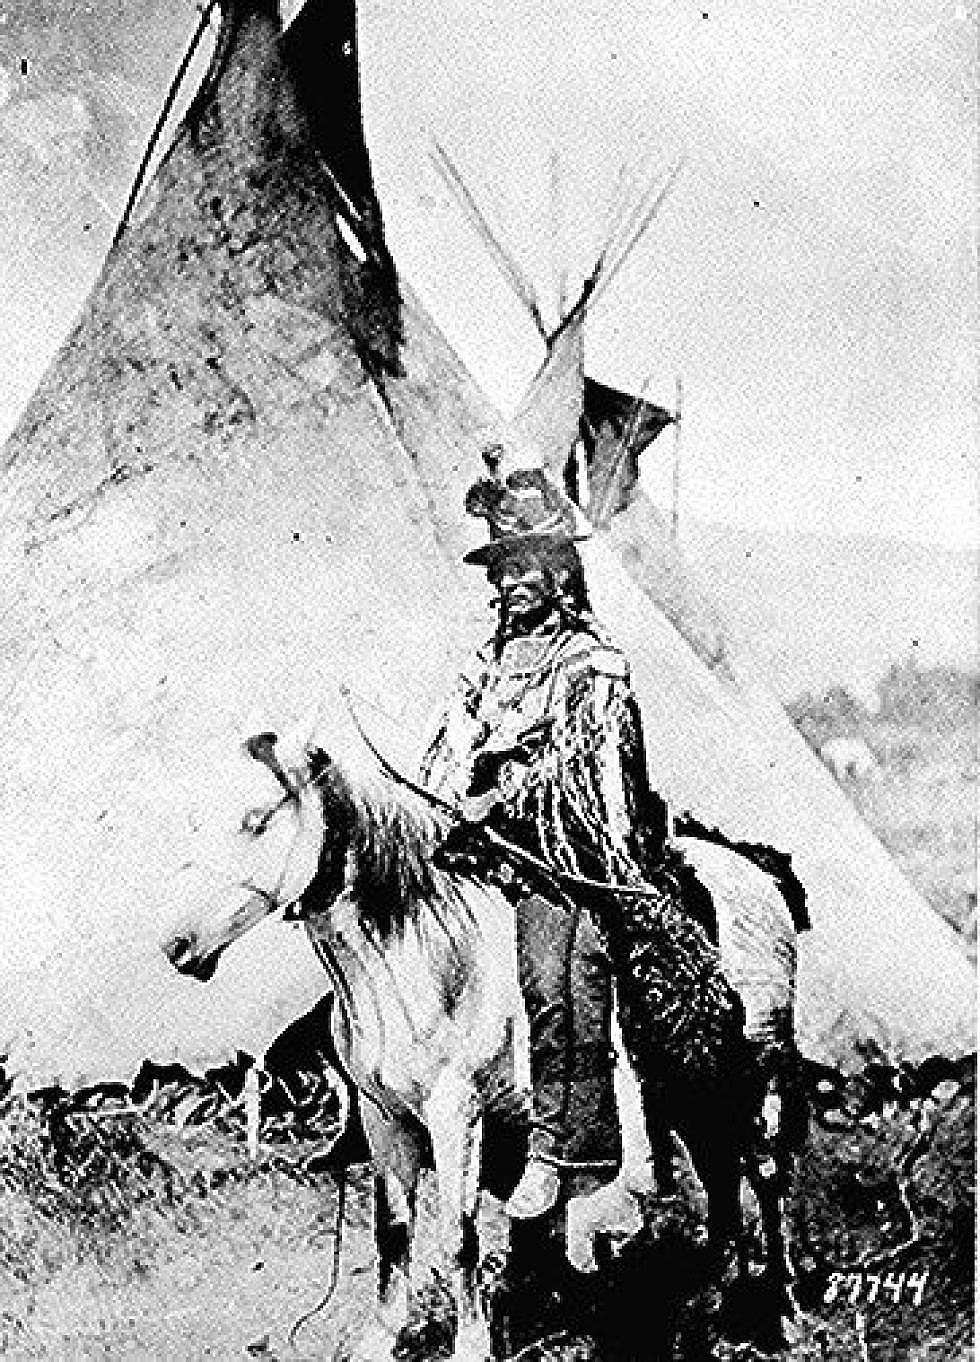 Harmon&#8217;s Histories: A remarkable account of the Nez Perce War, through Native eyes